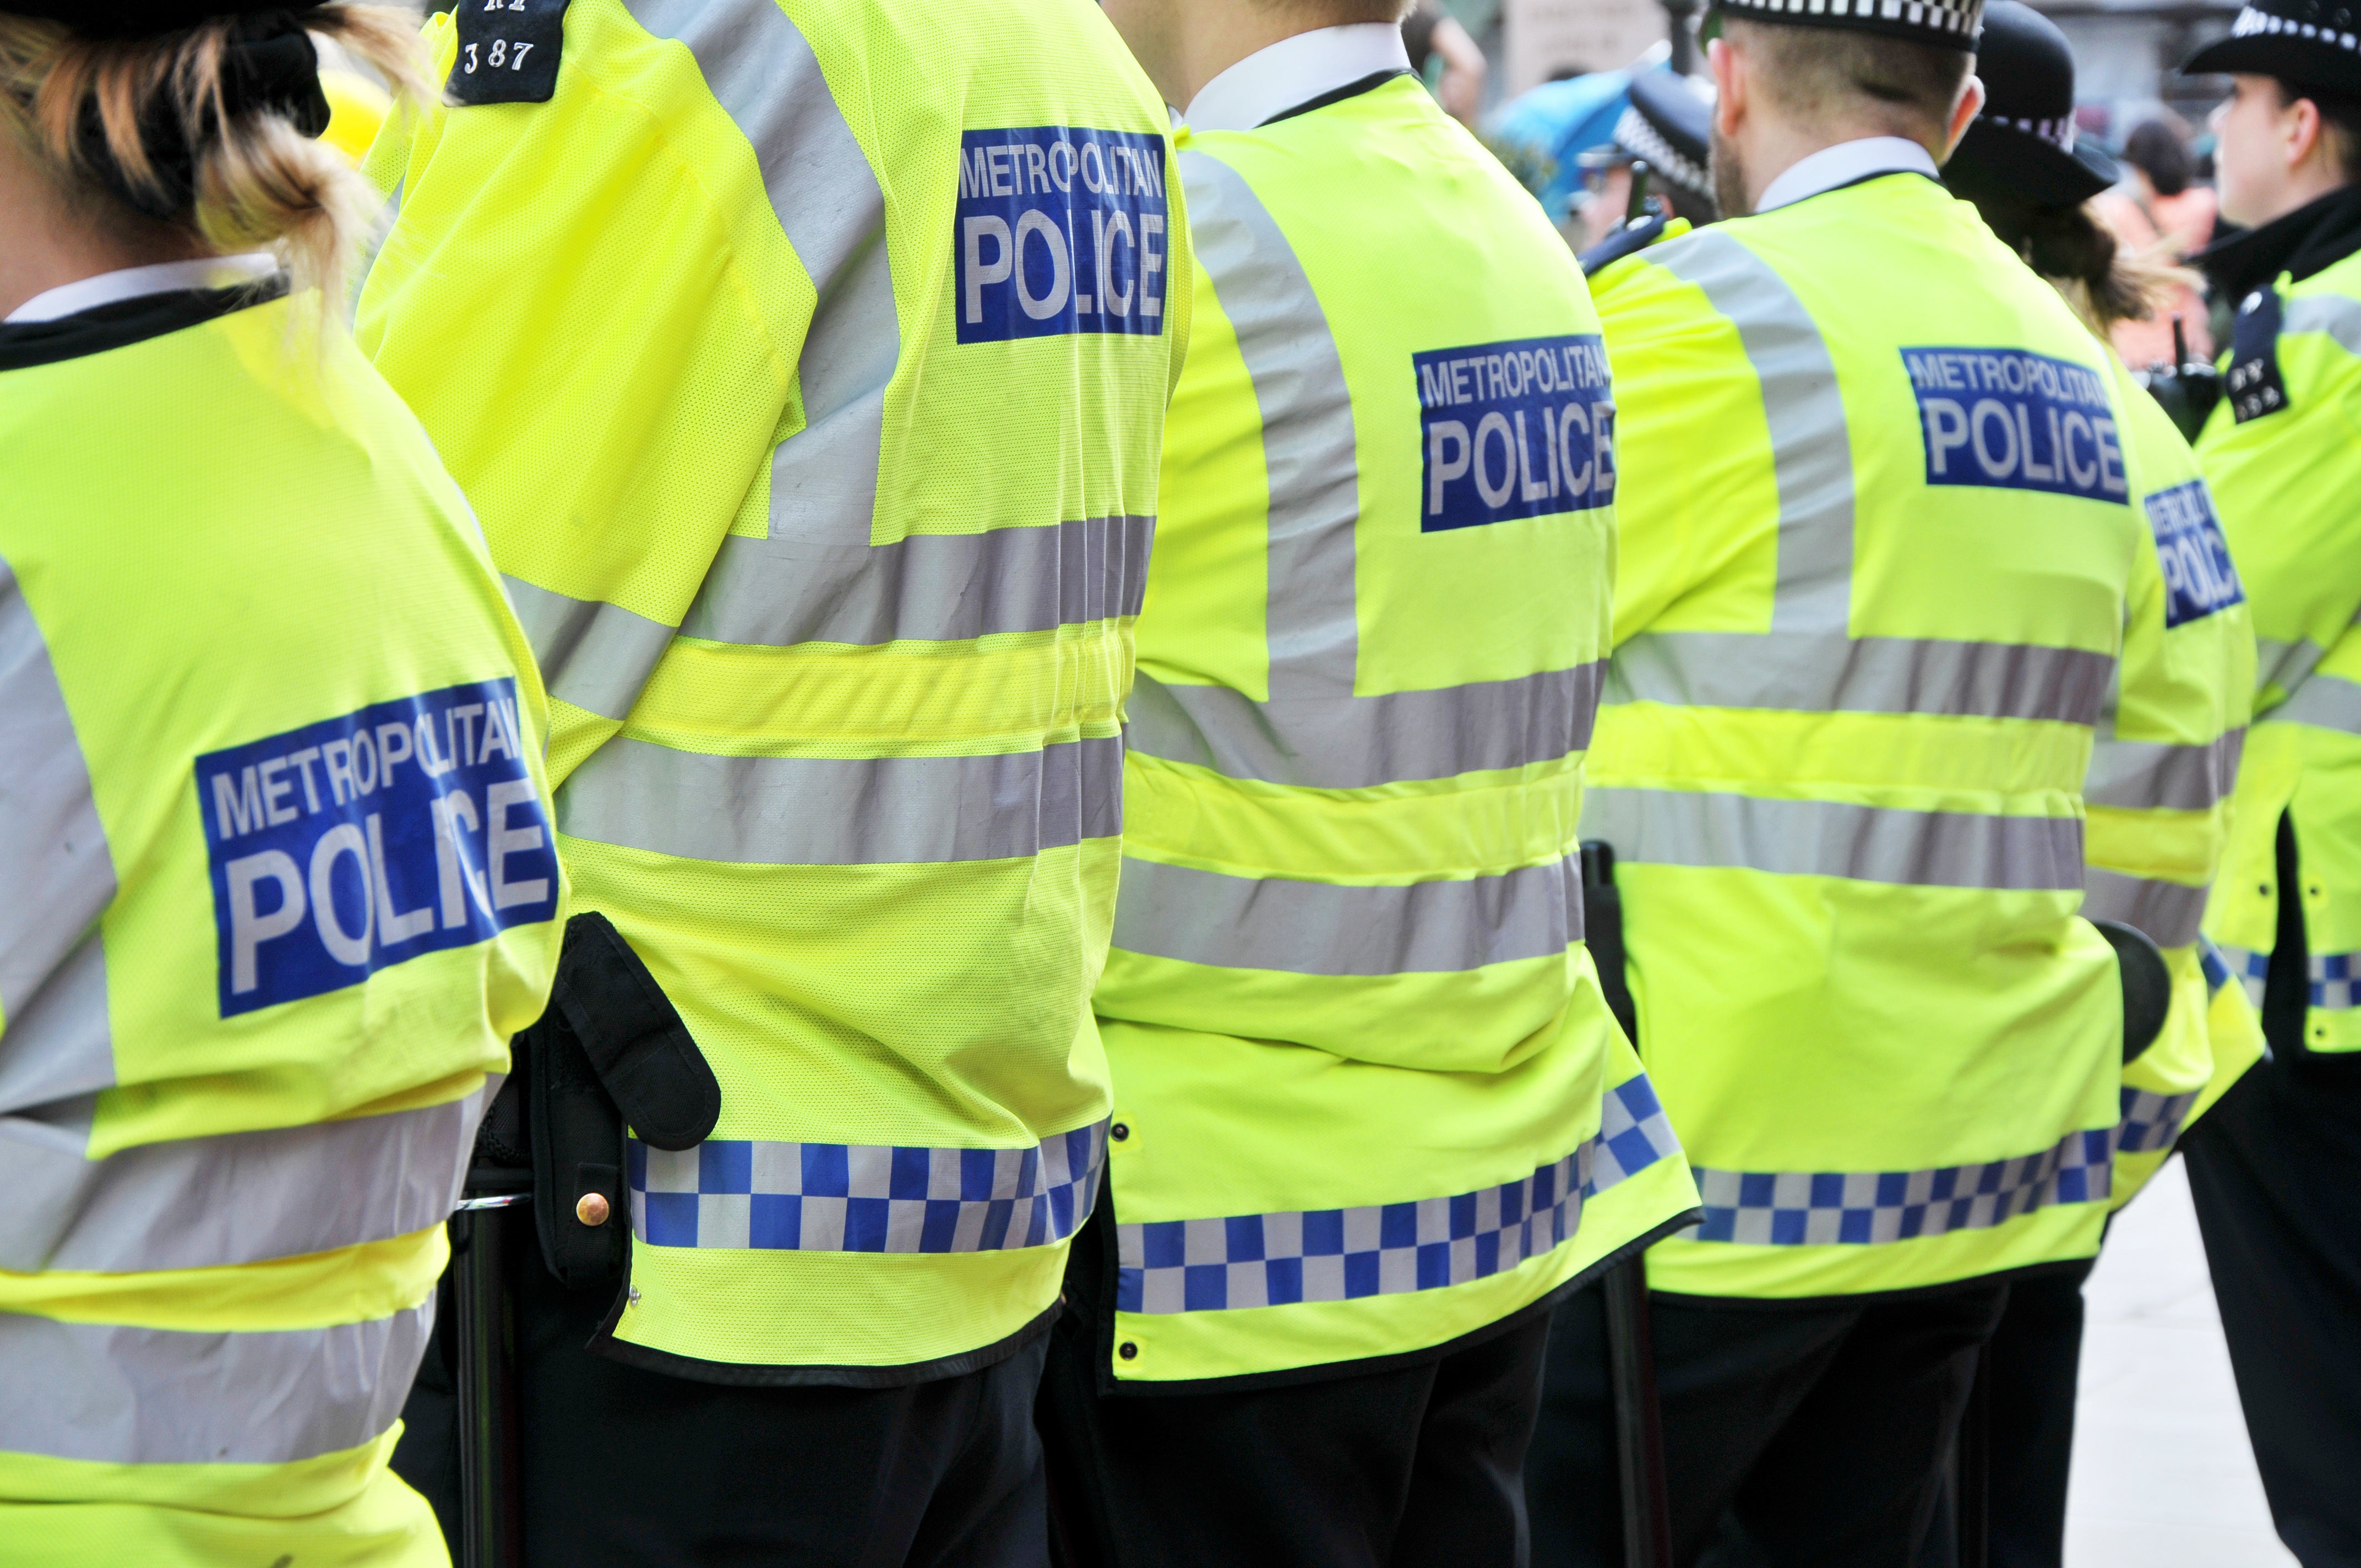 The Metropolitan Police can hardly withstand yet another significant scandal